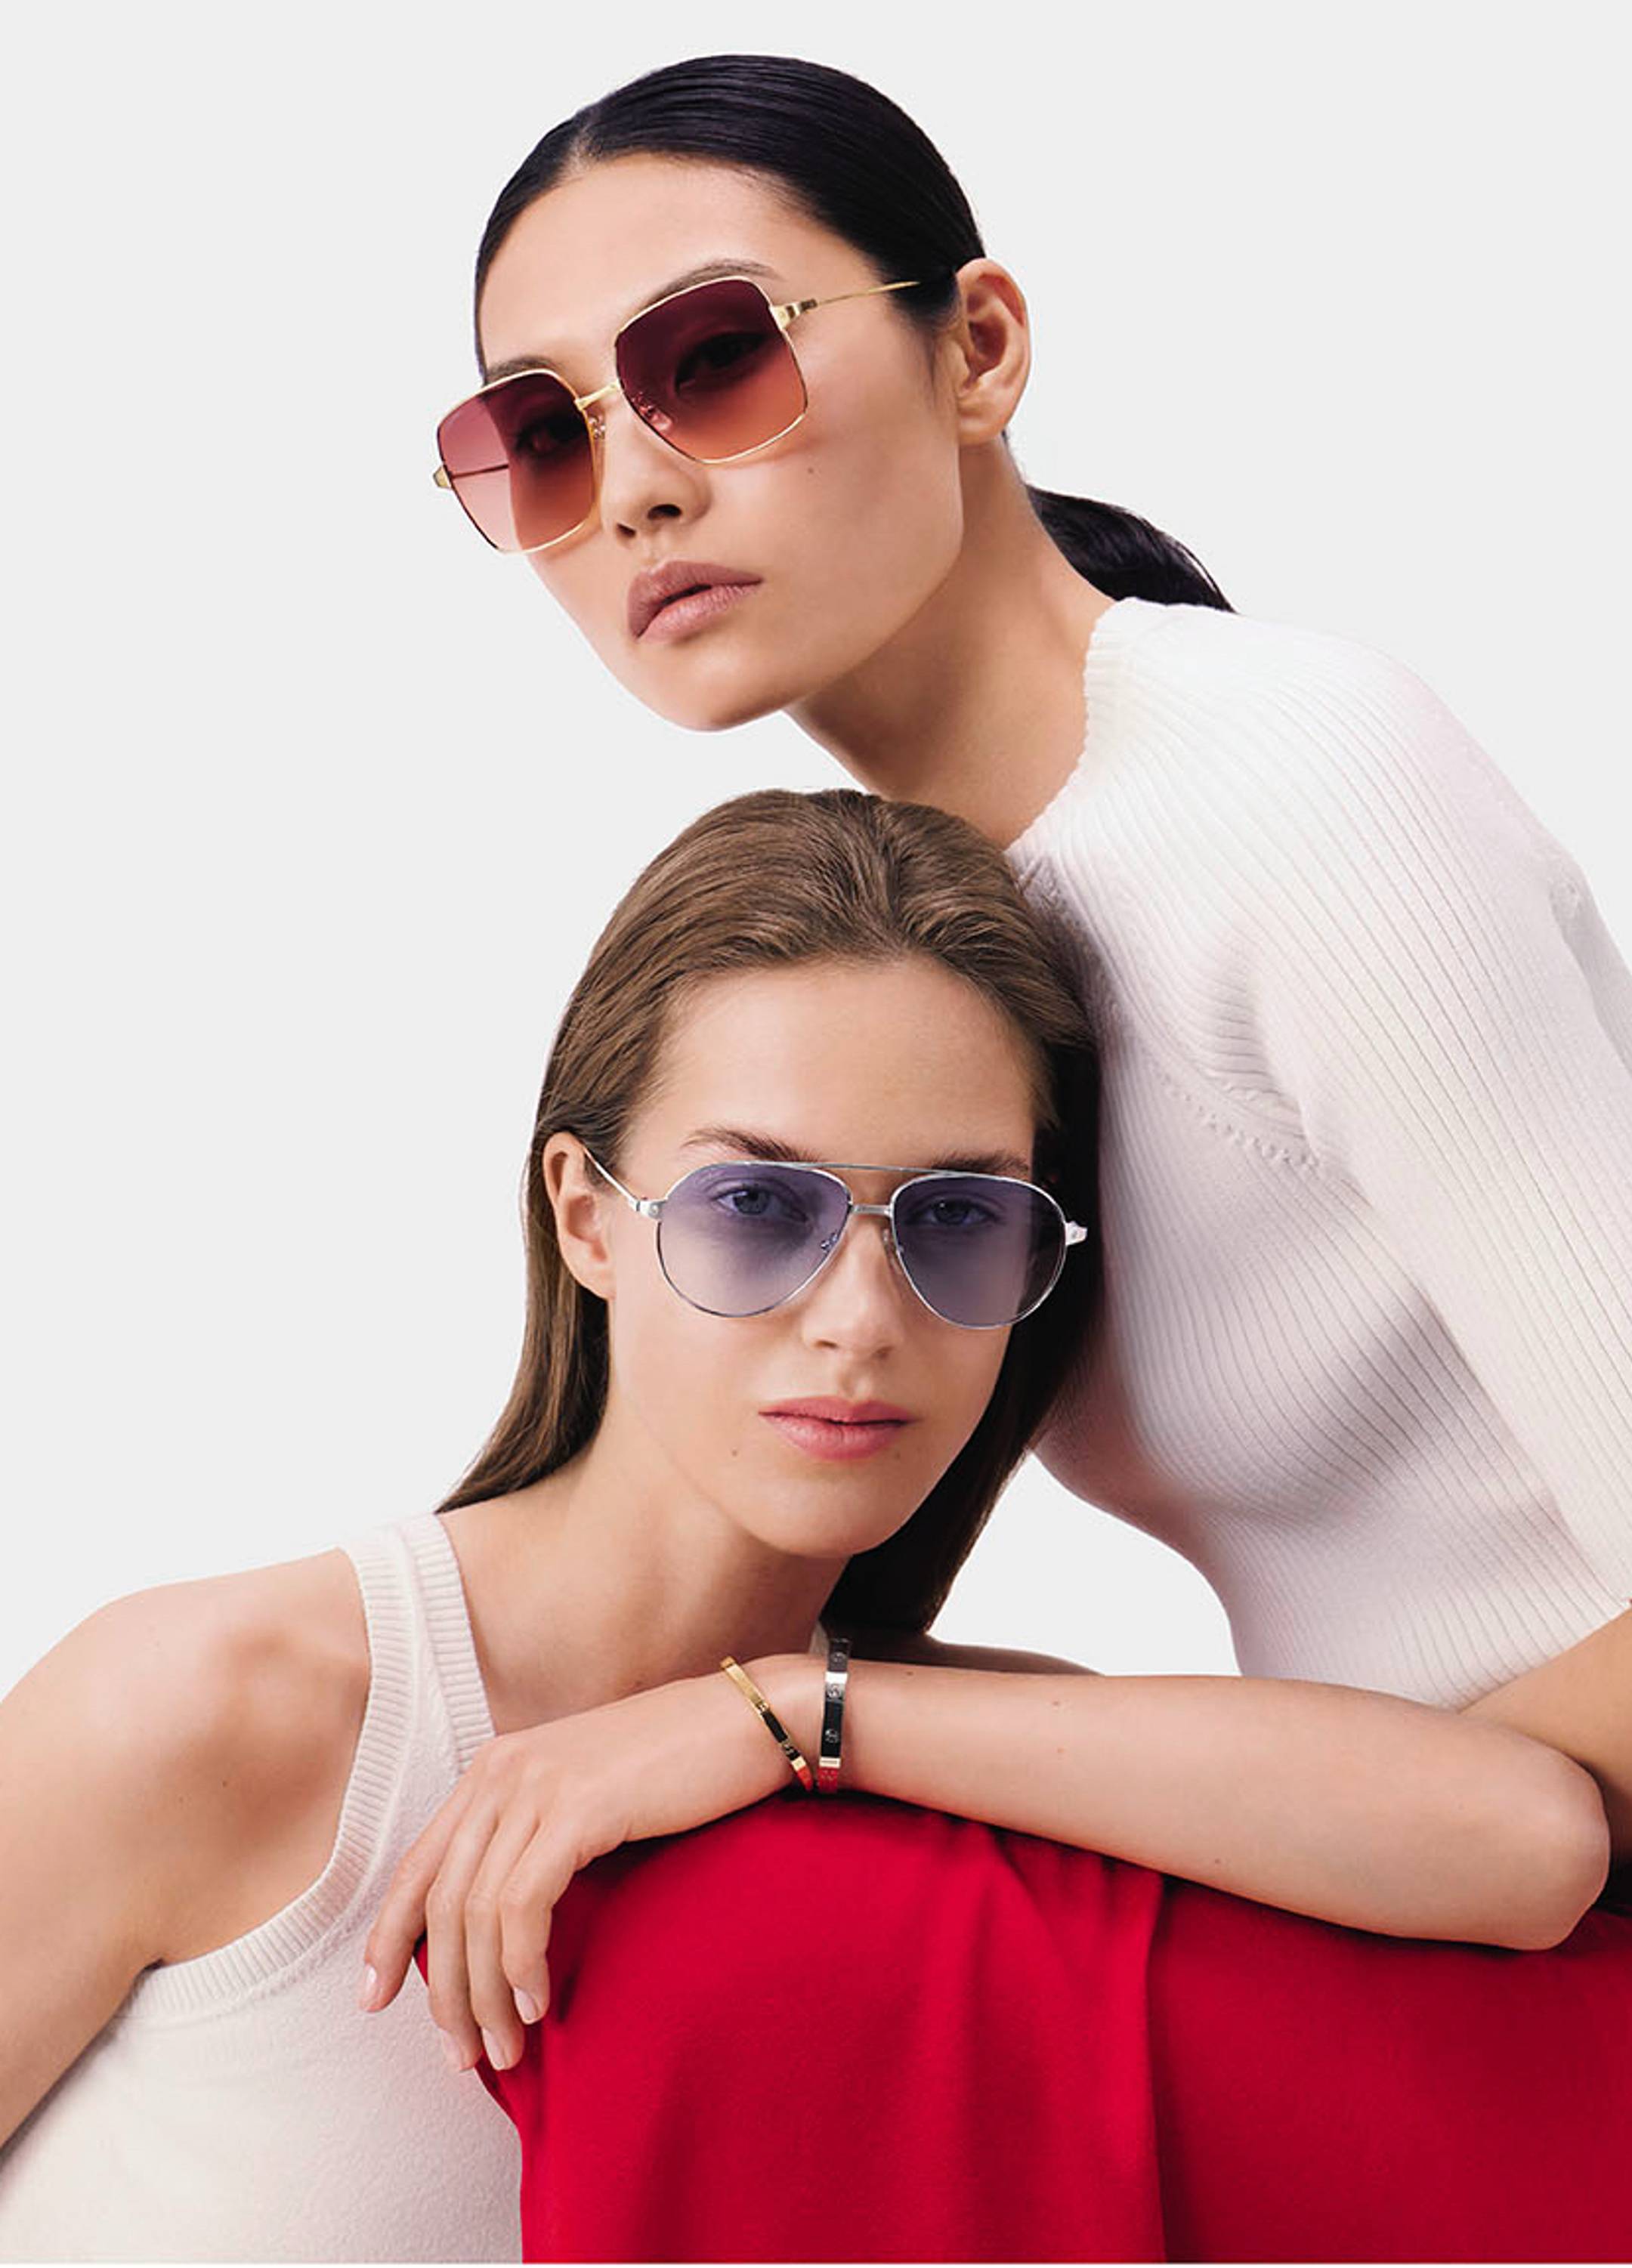 Two female models wearing Cartier sunglasses